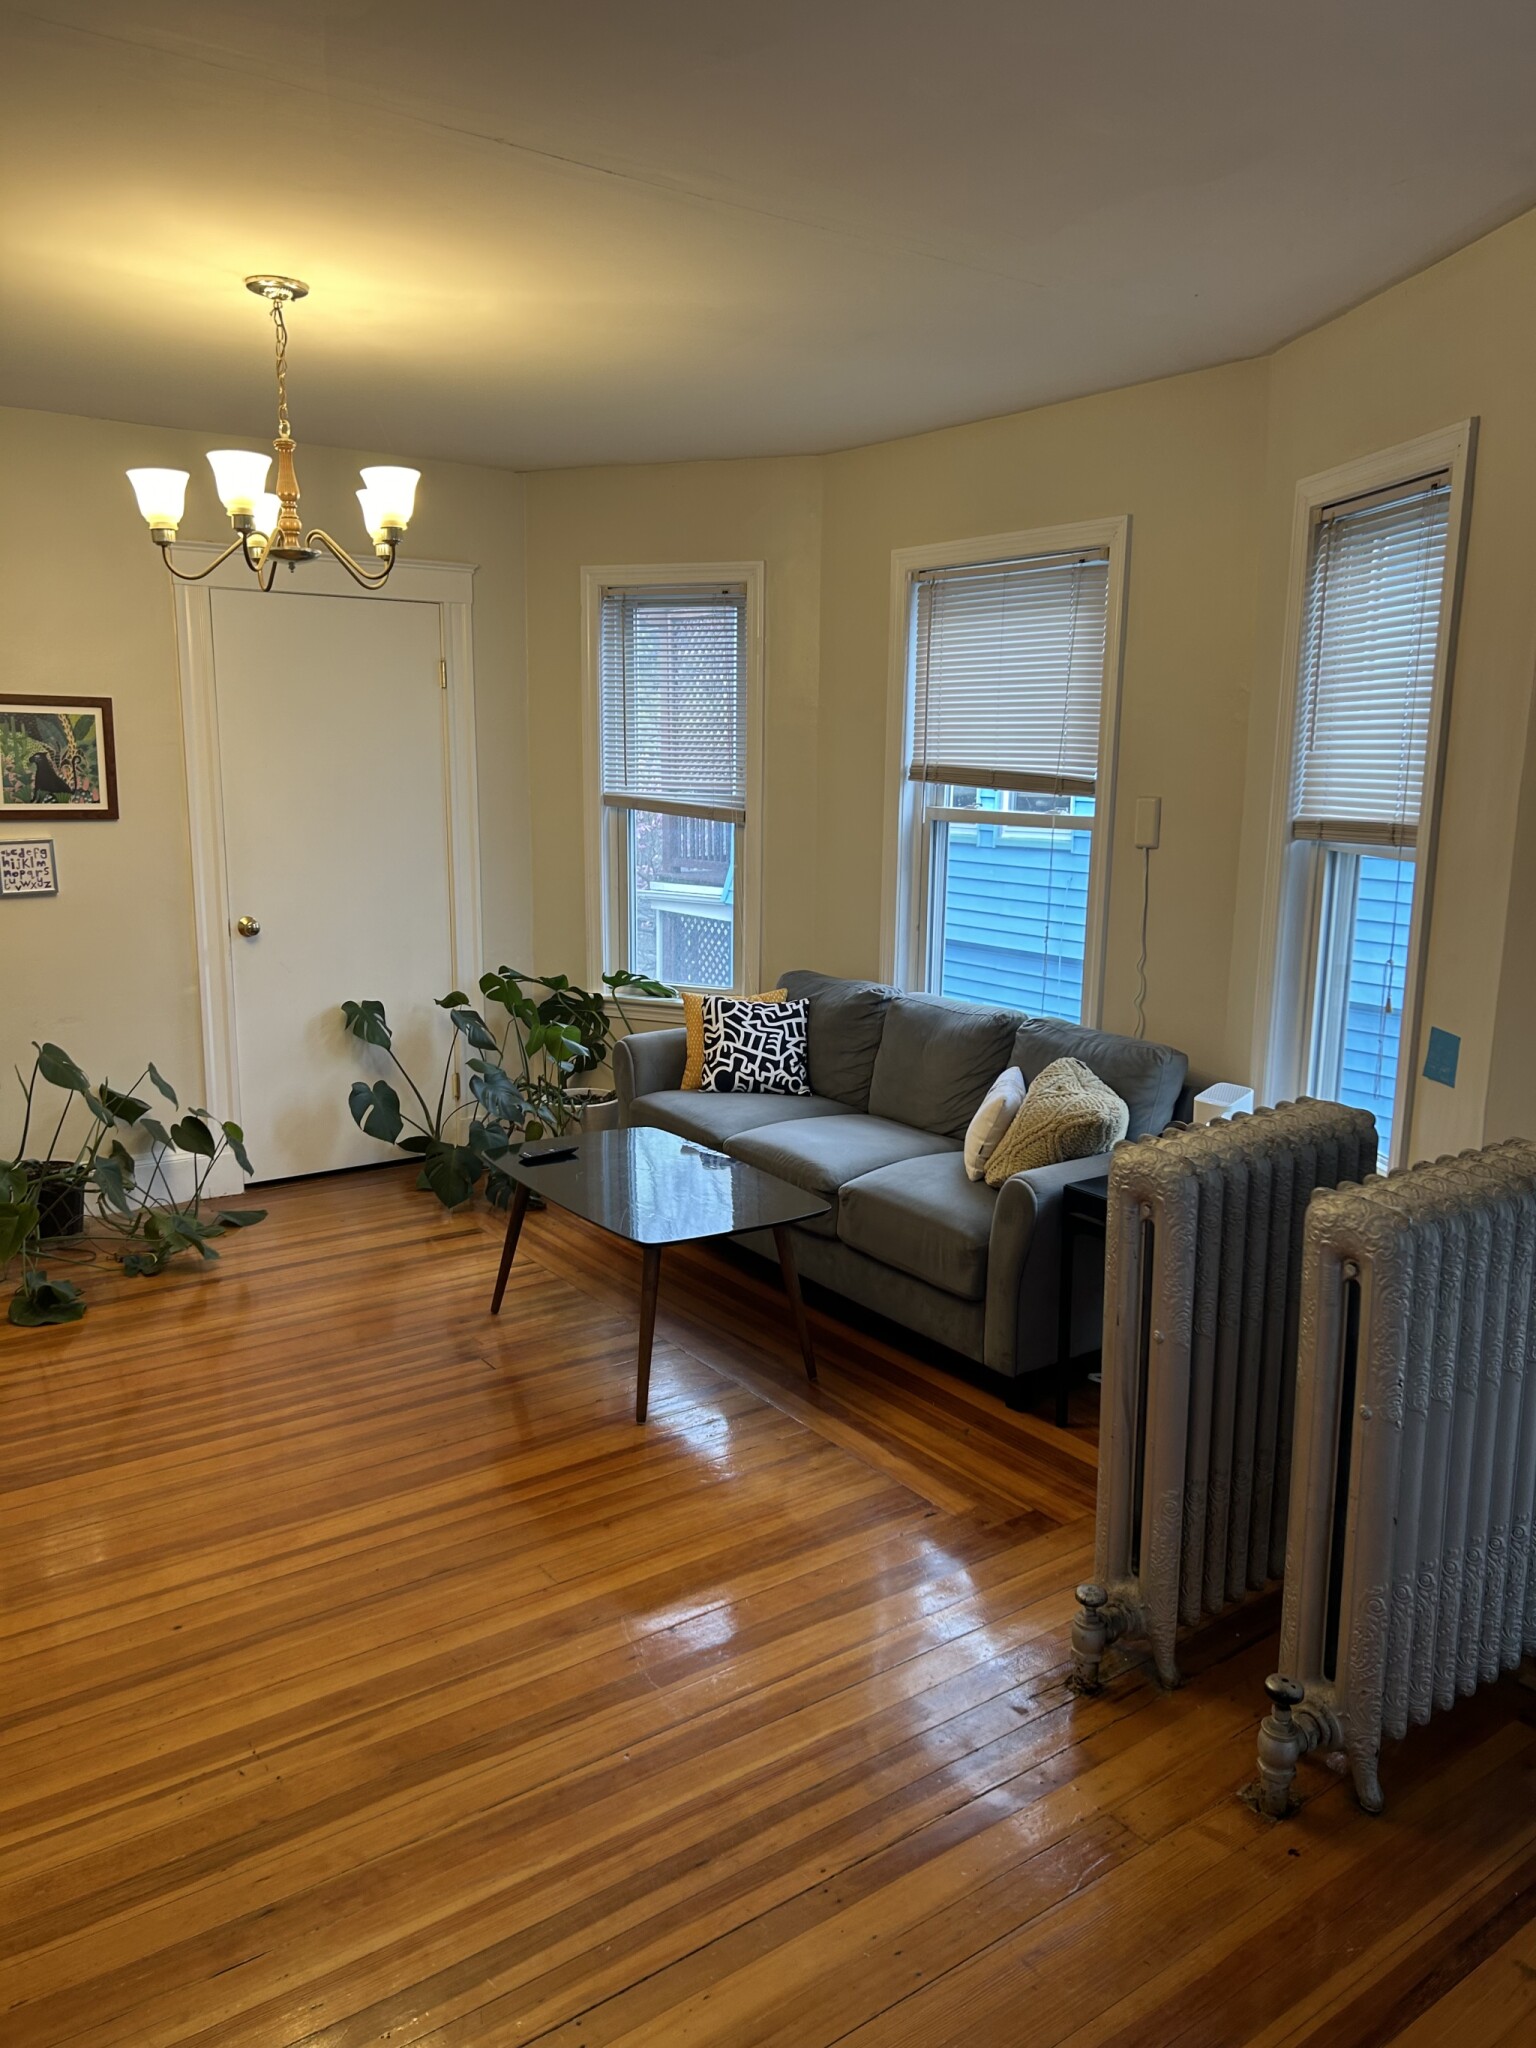 Photos of apartment on Sterling St.,Somerville MA 02144